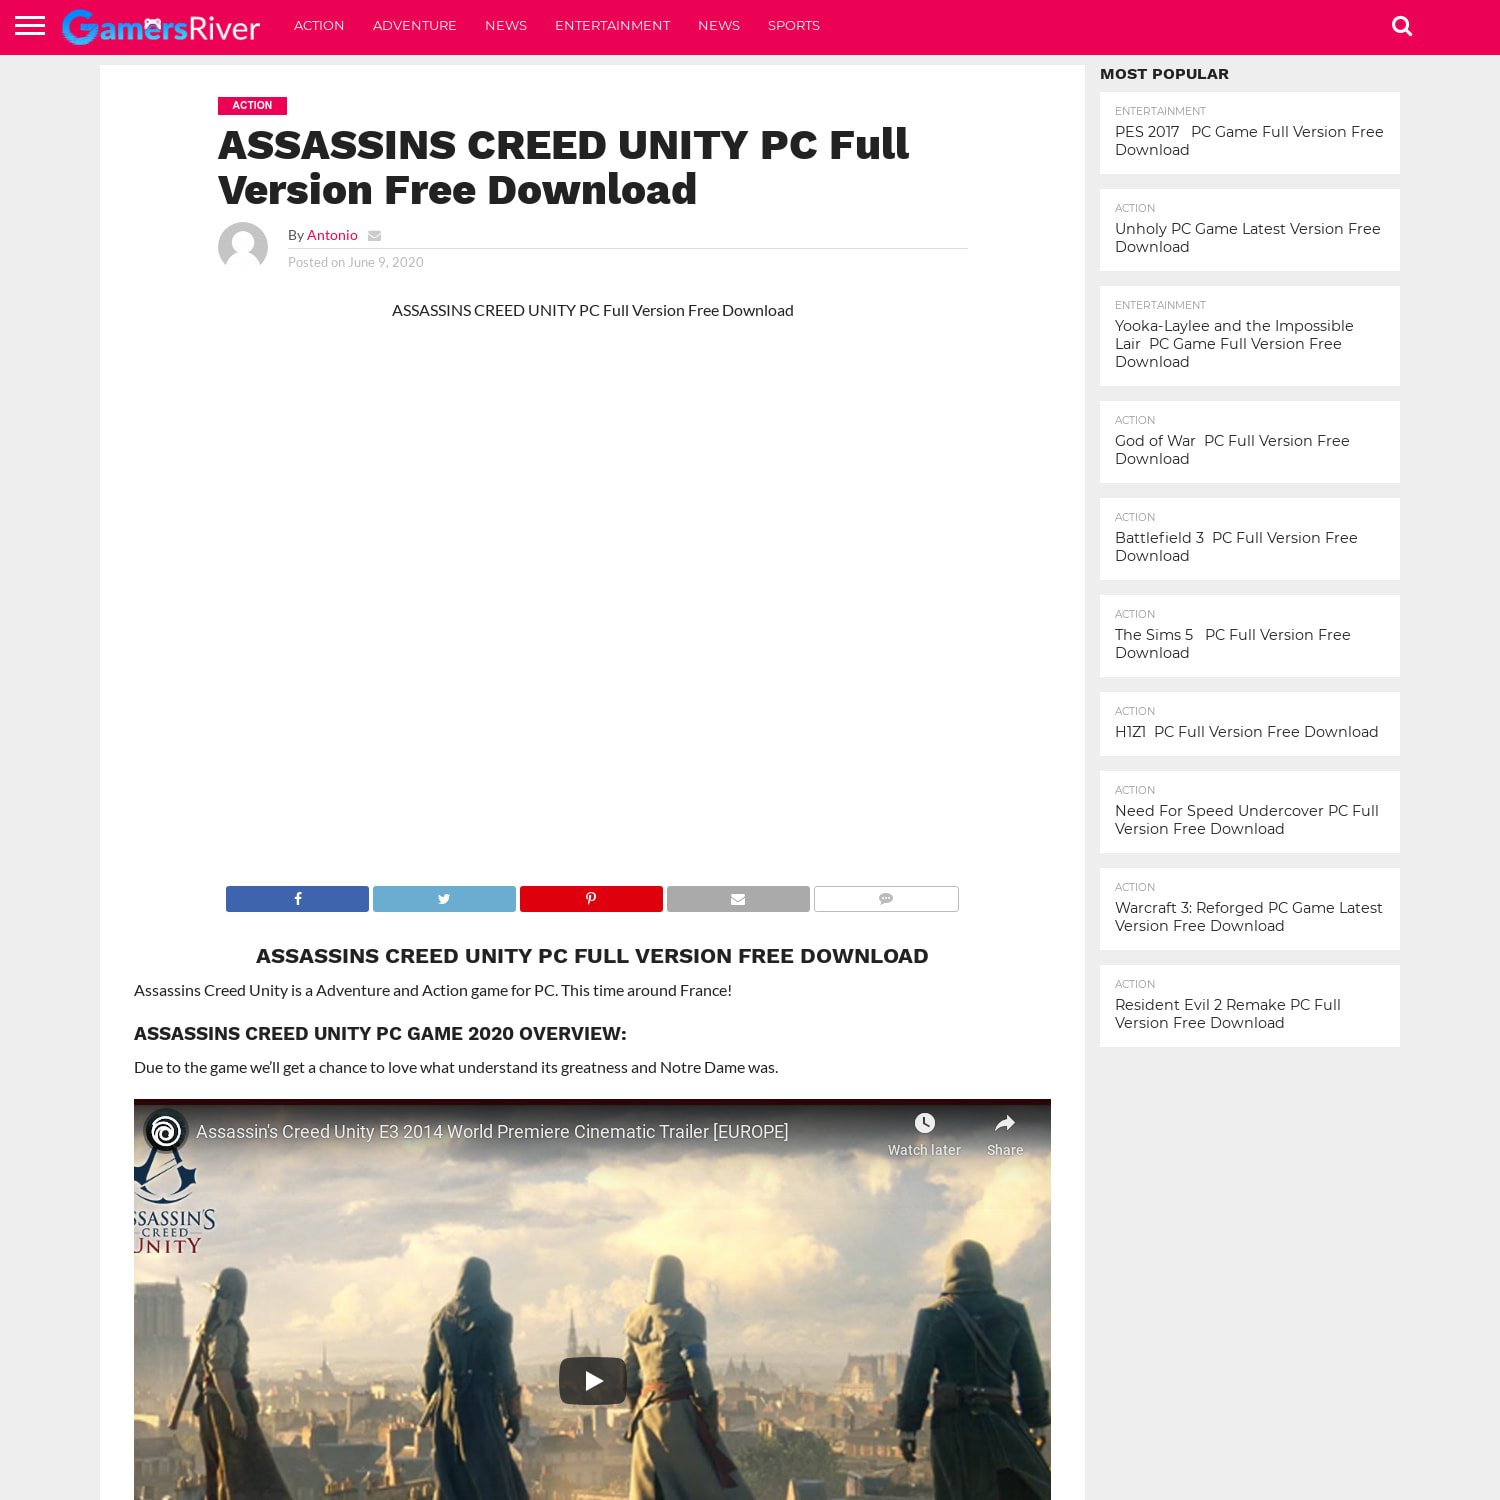 ASSASSINS CREED UNITY PC Full Version Free Download